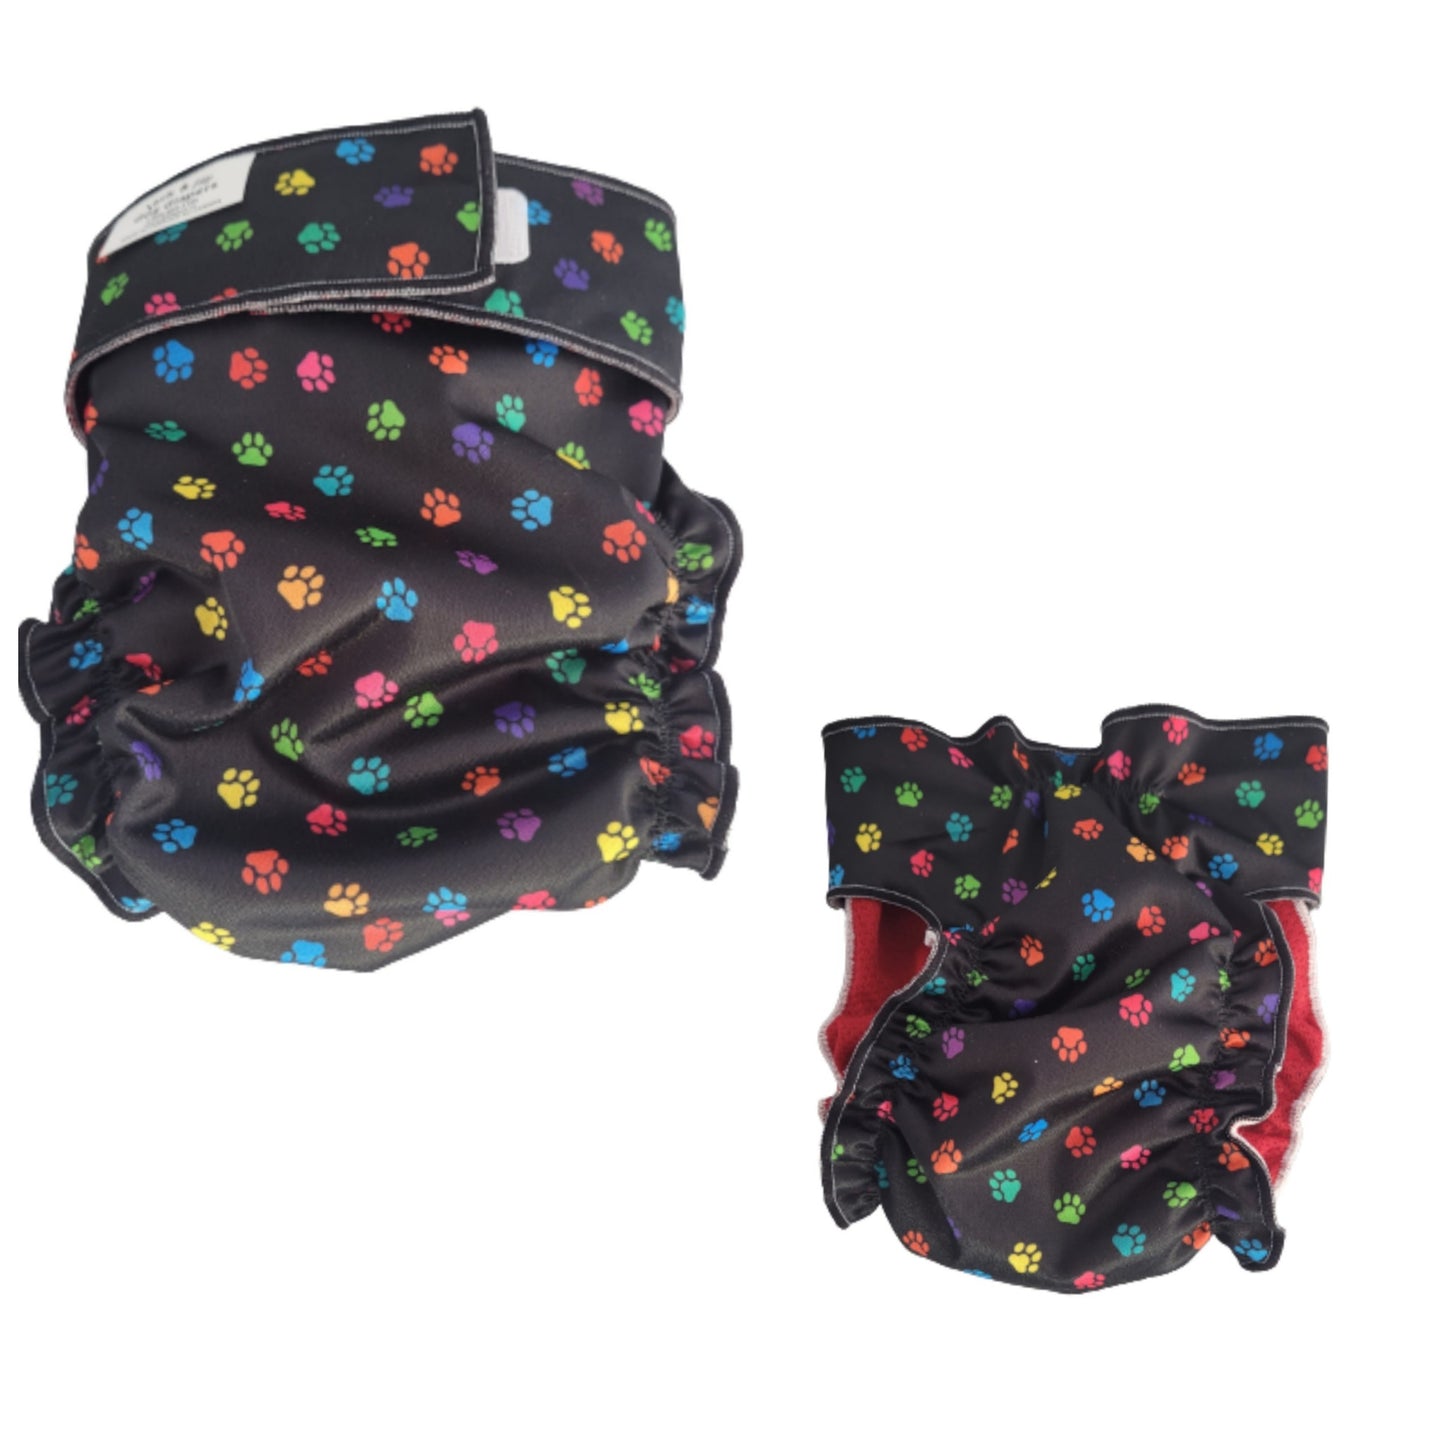 Printed Paw Female Dog Diapers | Dog Diapers | Jack & Jill Dog Diapers